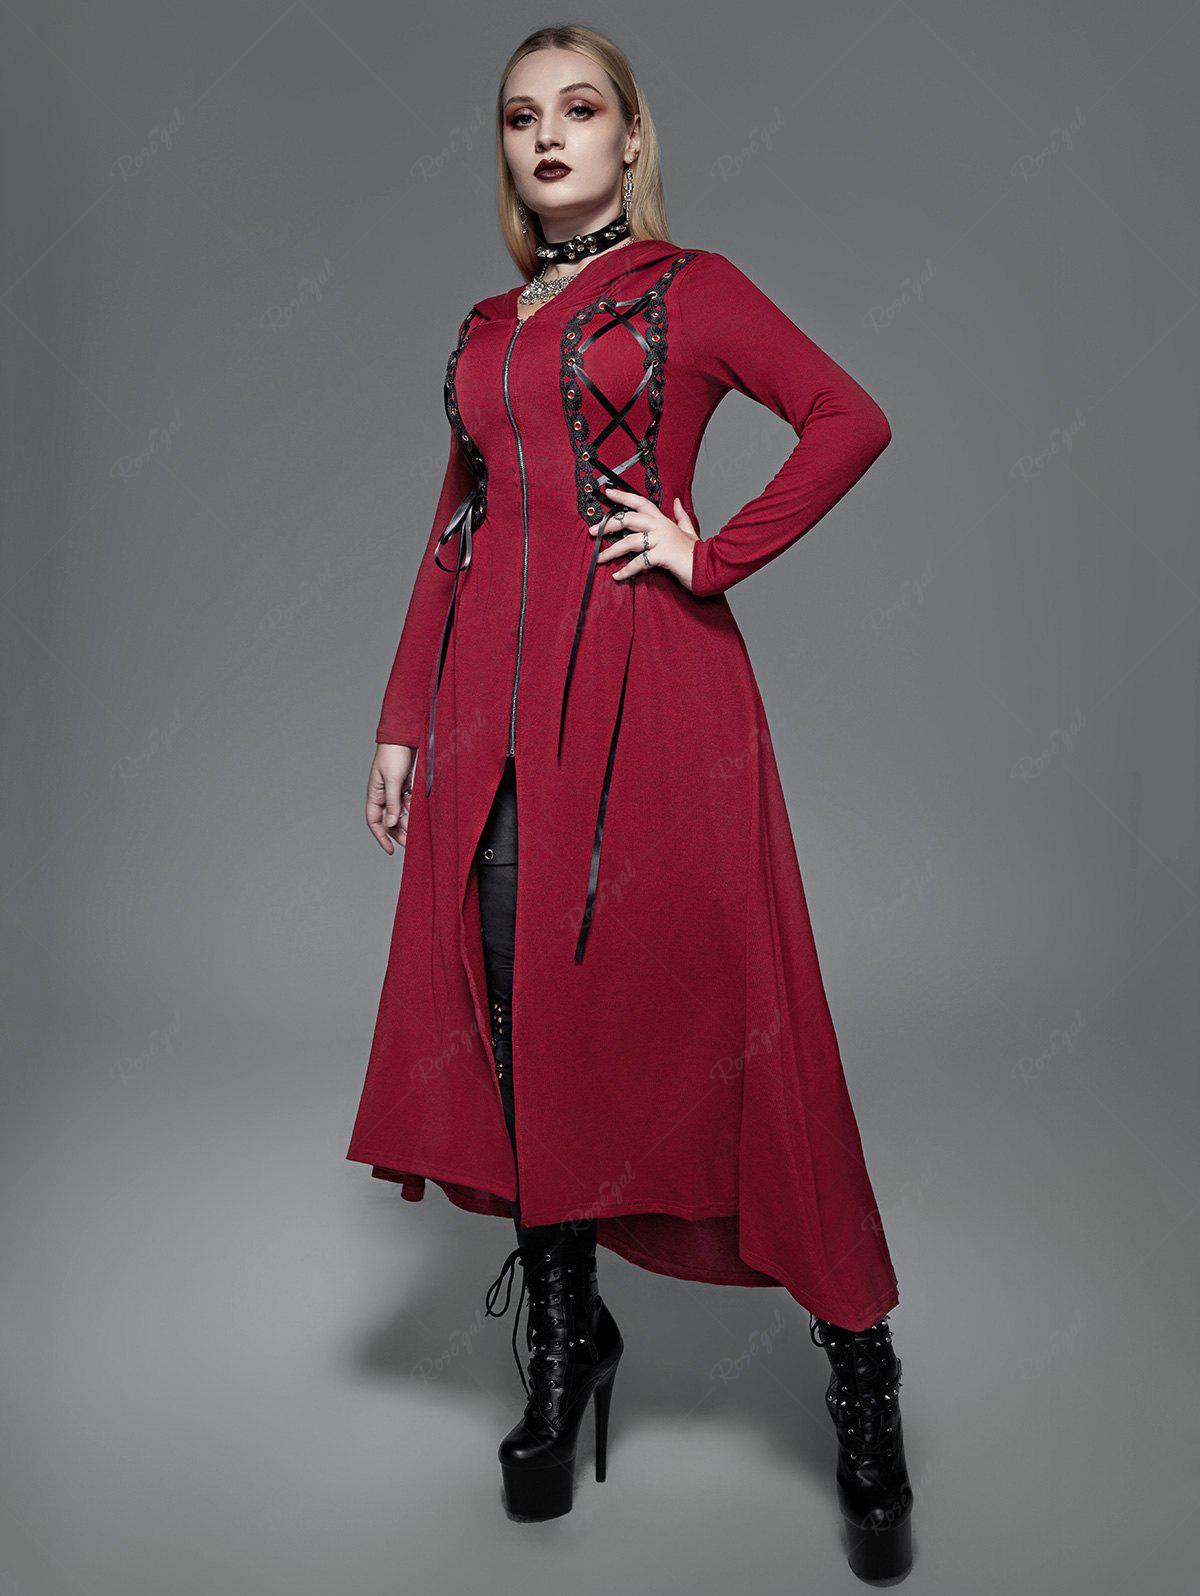 💗Lilith Loves💗 Gothic Hooded Lace Up Front Zipper High Low Maxi Coat